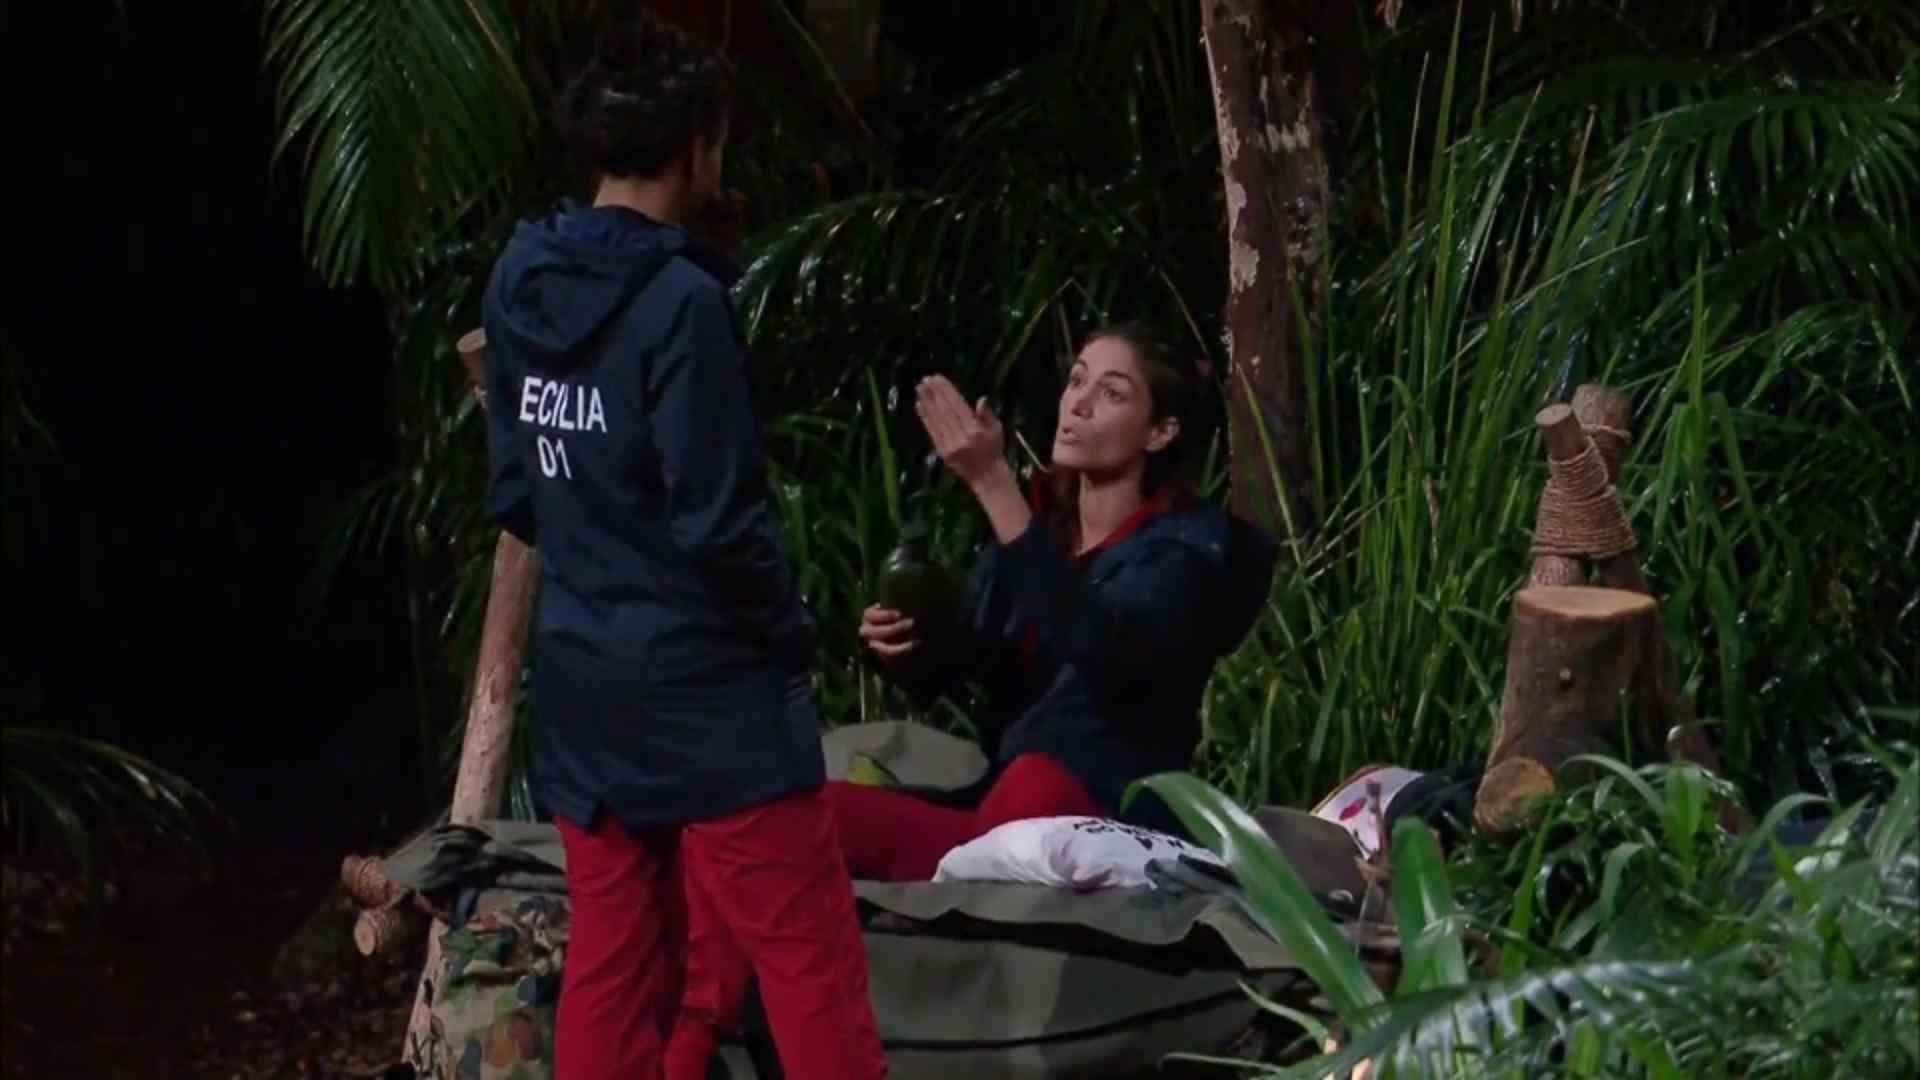 There's a bang between Cecilia and Tessa in the jungle camp "You have two faces!"